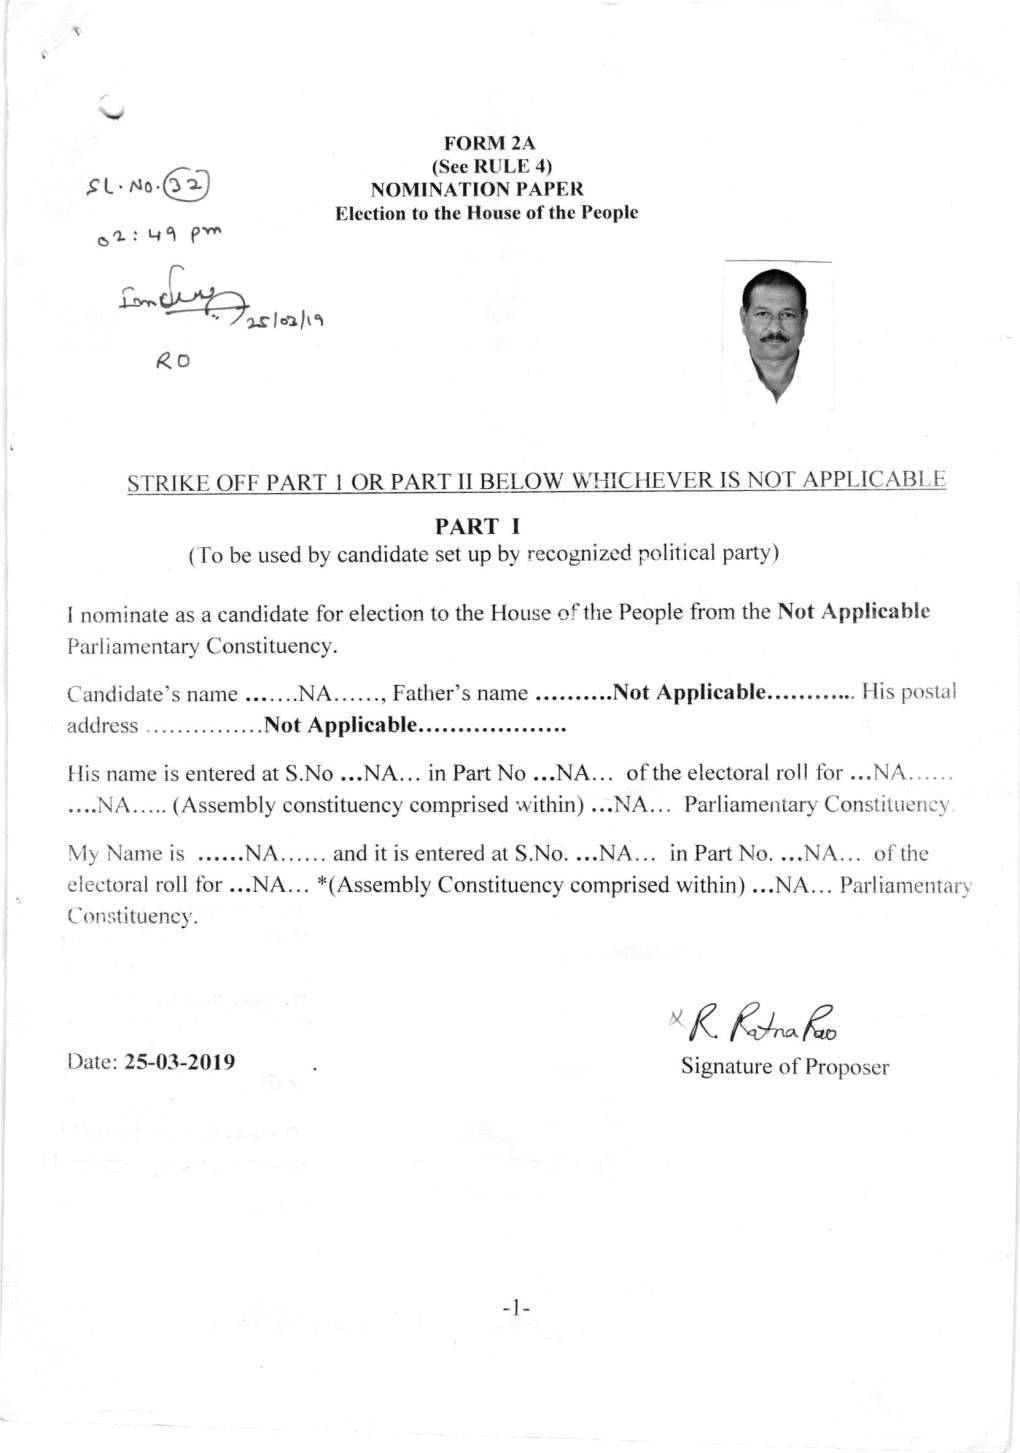 F T'r.Ro.6Z-) NOMINATION PAPER Election to the House of the People O,L: Lrq PY"